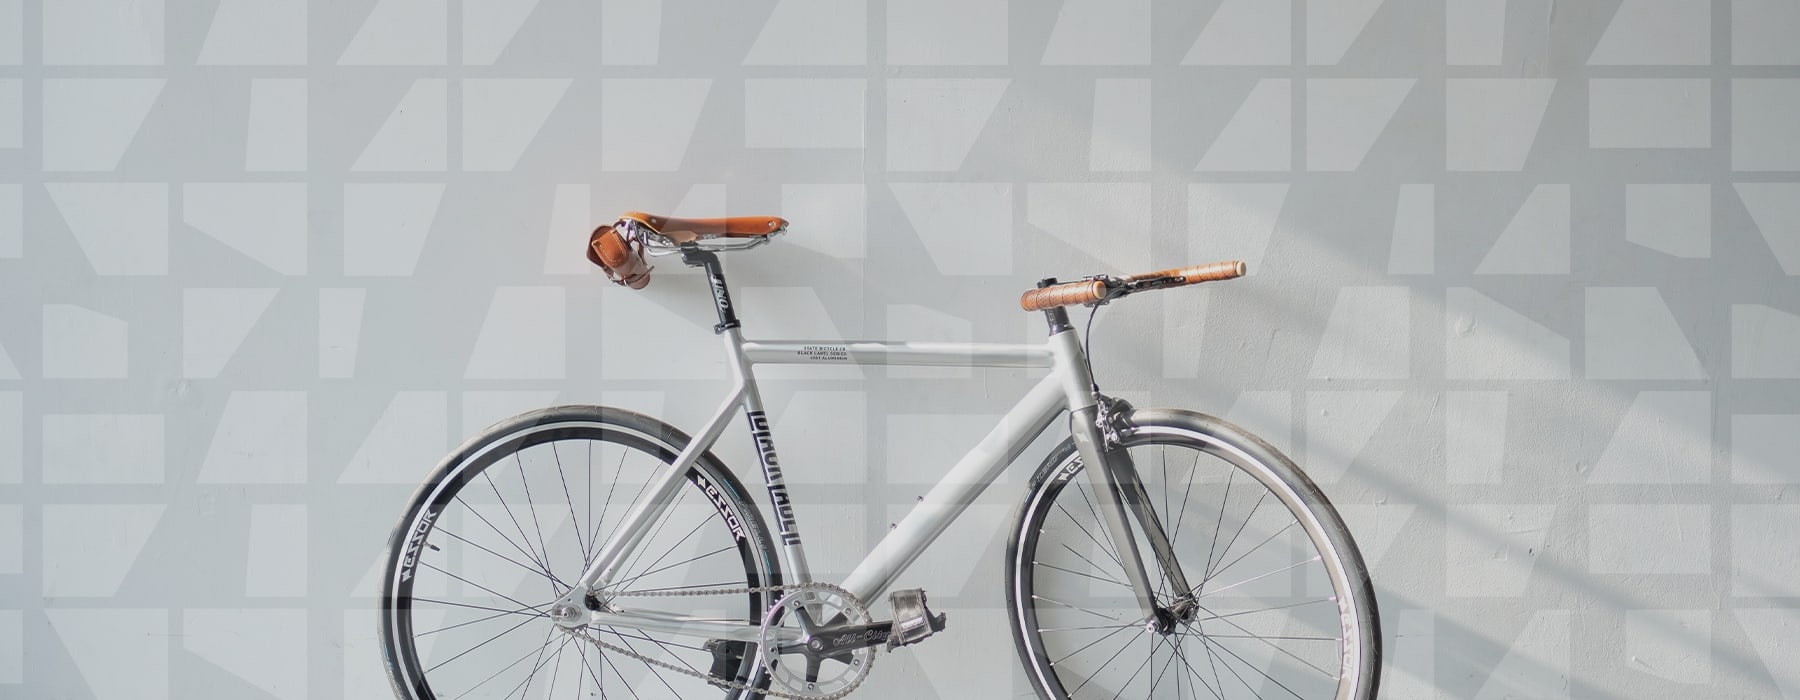 lifestyle image of a bicycle up against a white wall